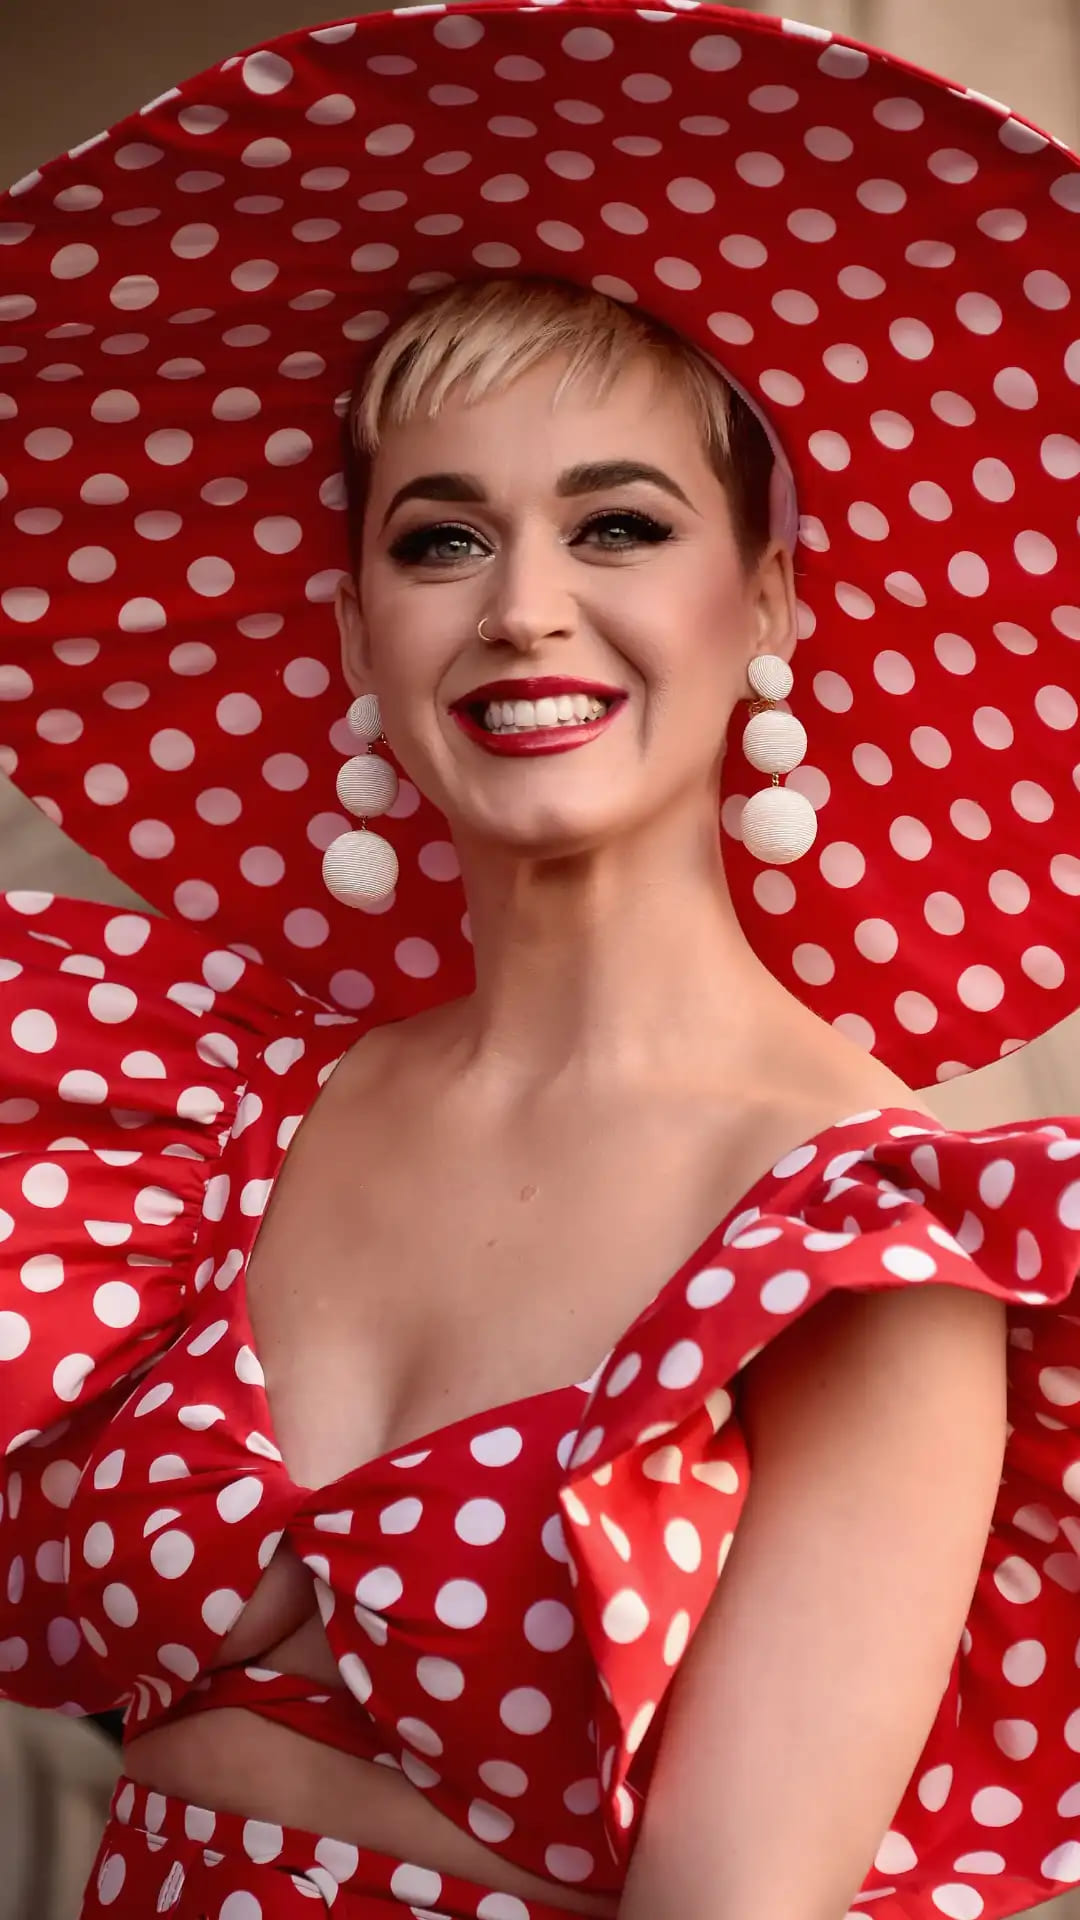 Katy Perry 2020 Wallpapers